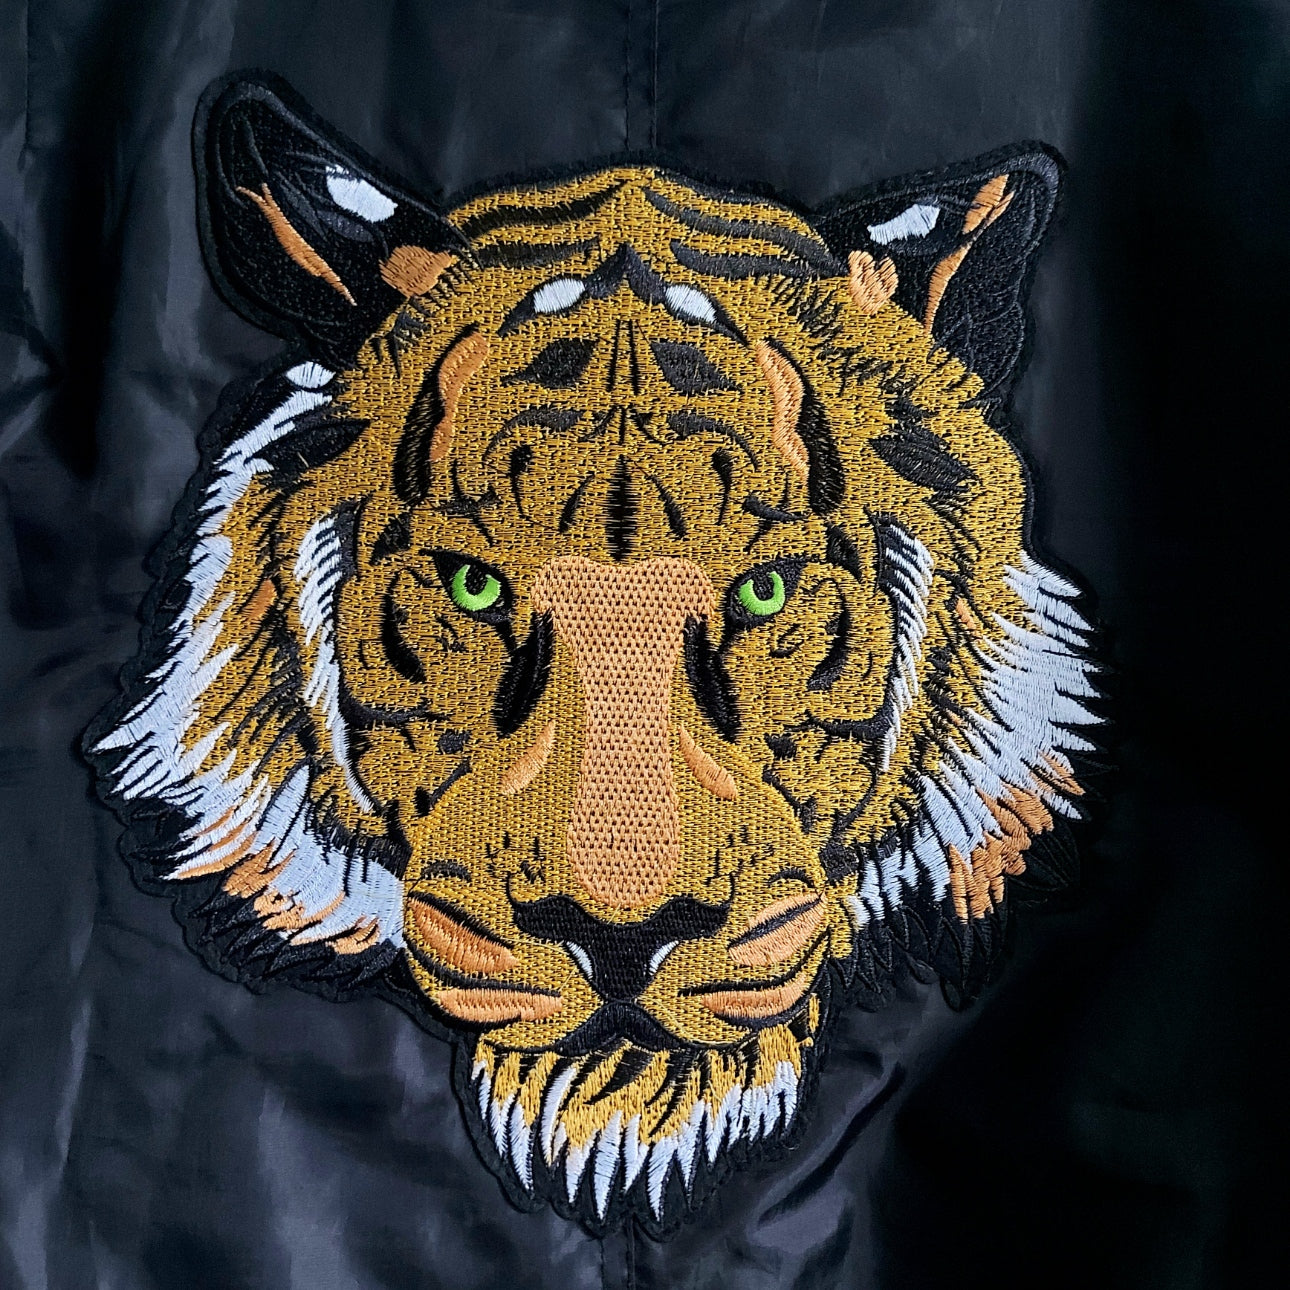 Tiger Bomber Jacket - Size Small